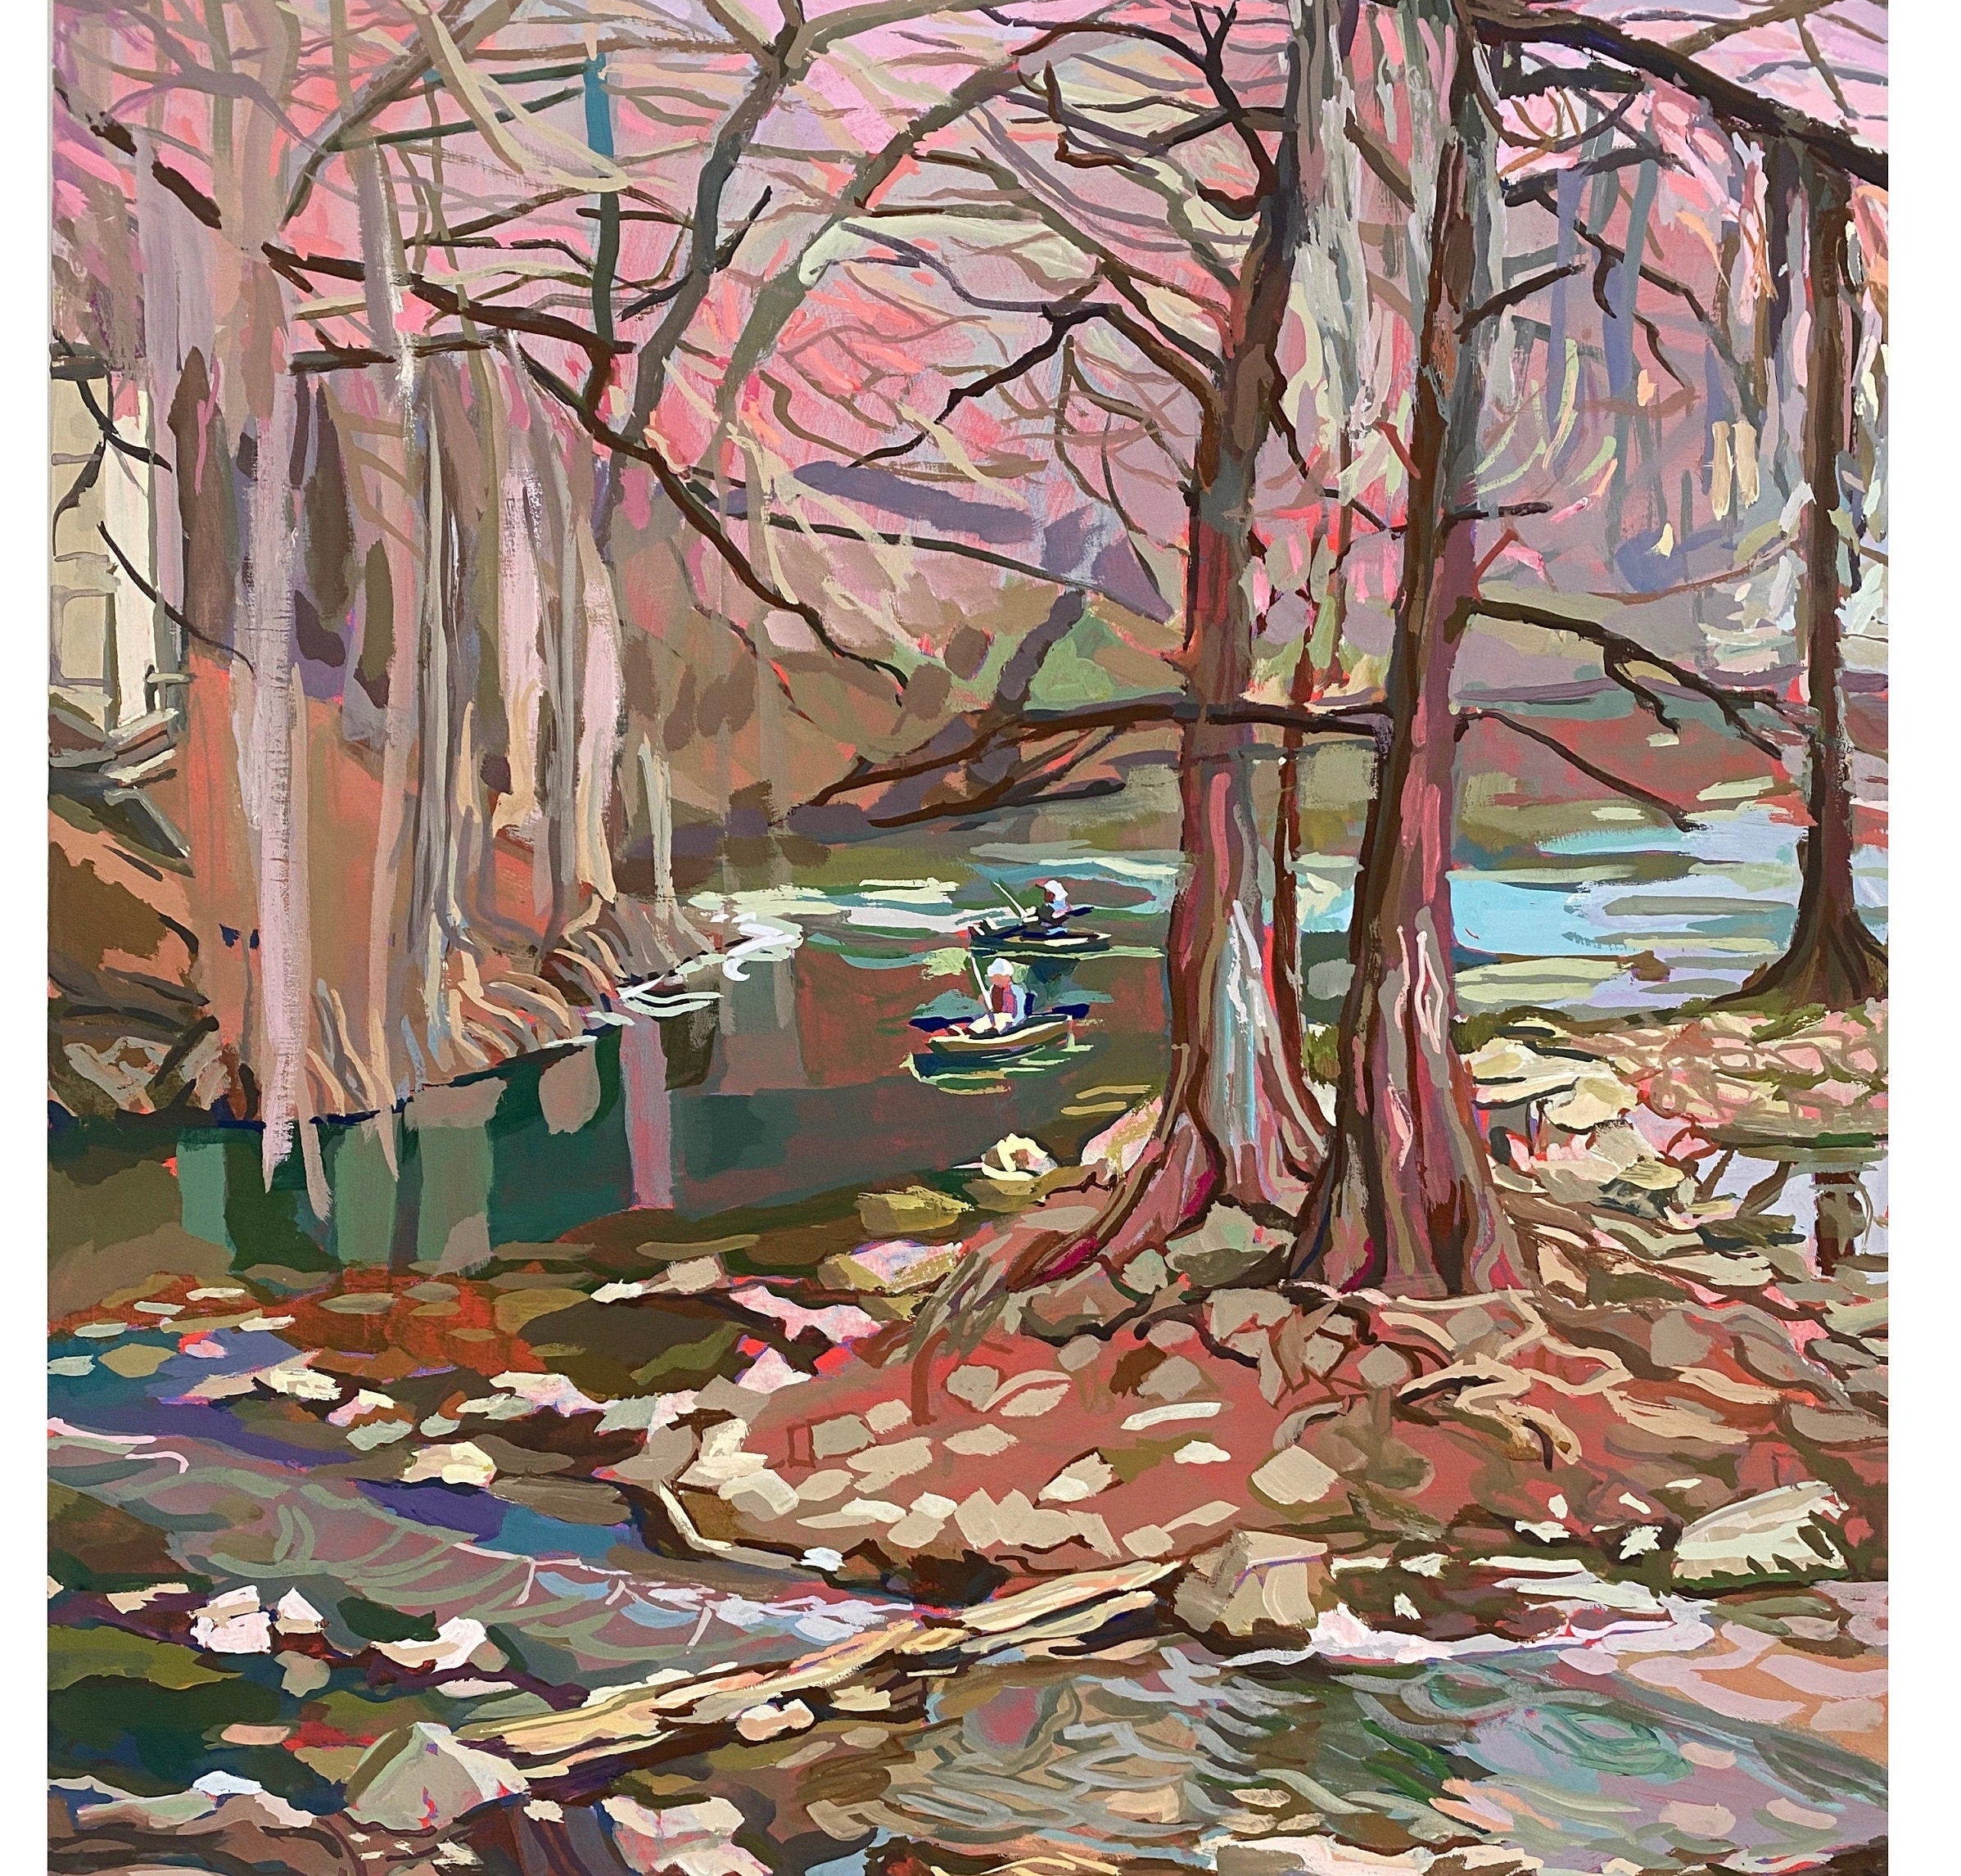 Large Texas River Art Print of the Guadalupe River | Texas Landscape Print of Original Gouache Painting | Gruene Texas | 30x40 Gallery Wall Art